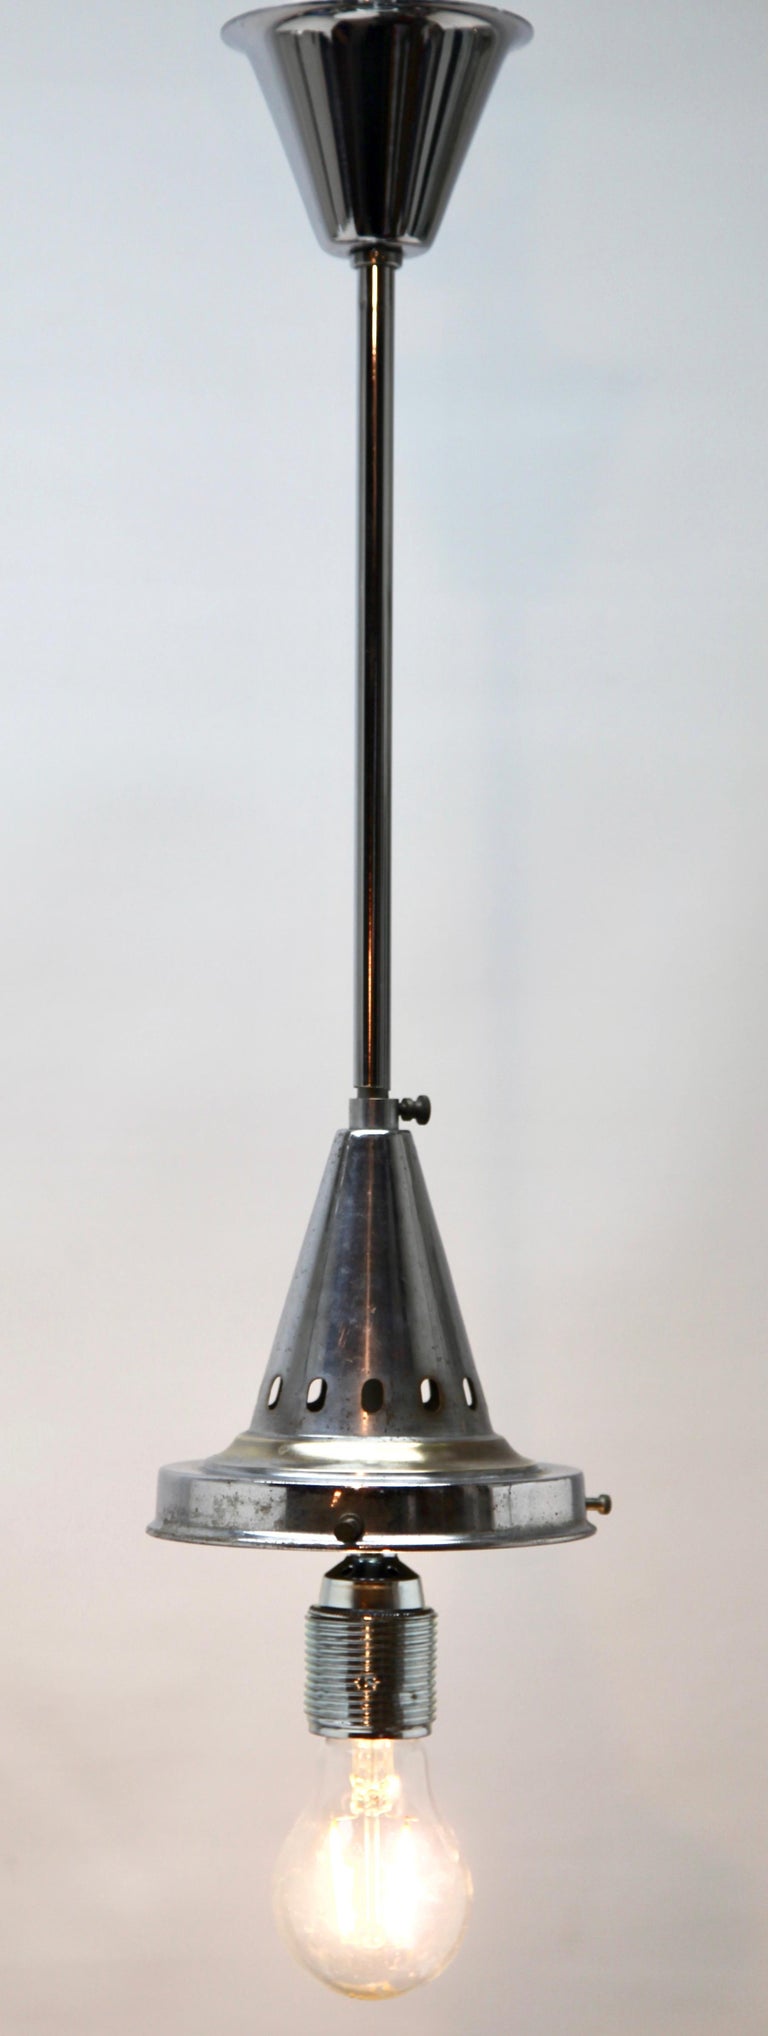 Phillips Pendant Stem Lamp with Large Stepped Opaline Shade, 1930s, Belgium For Sale 3